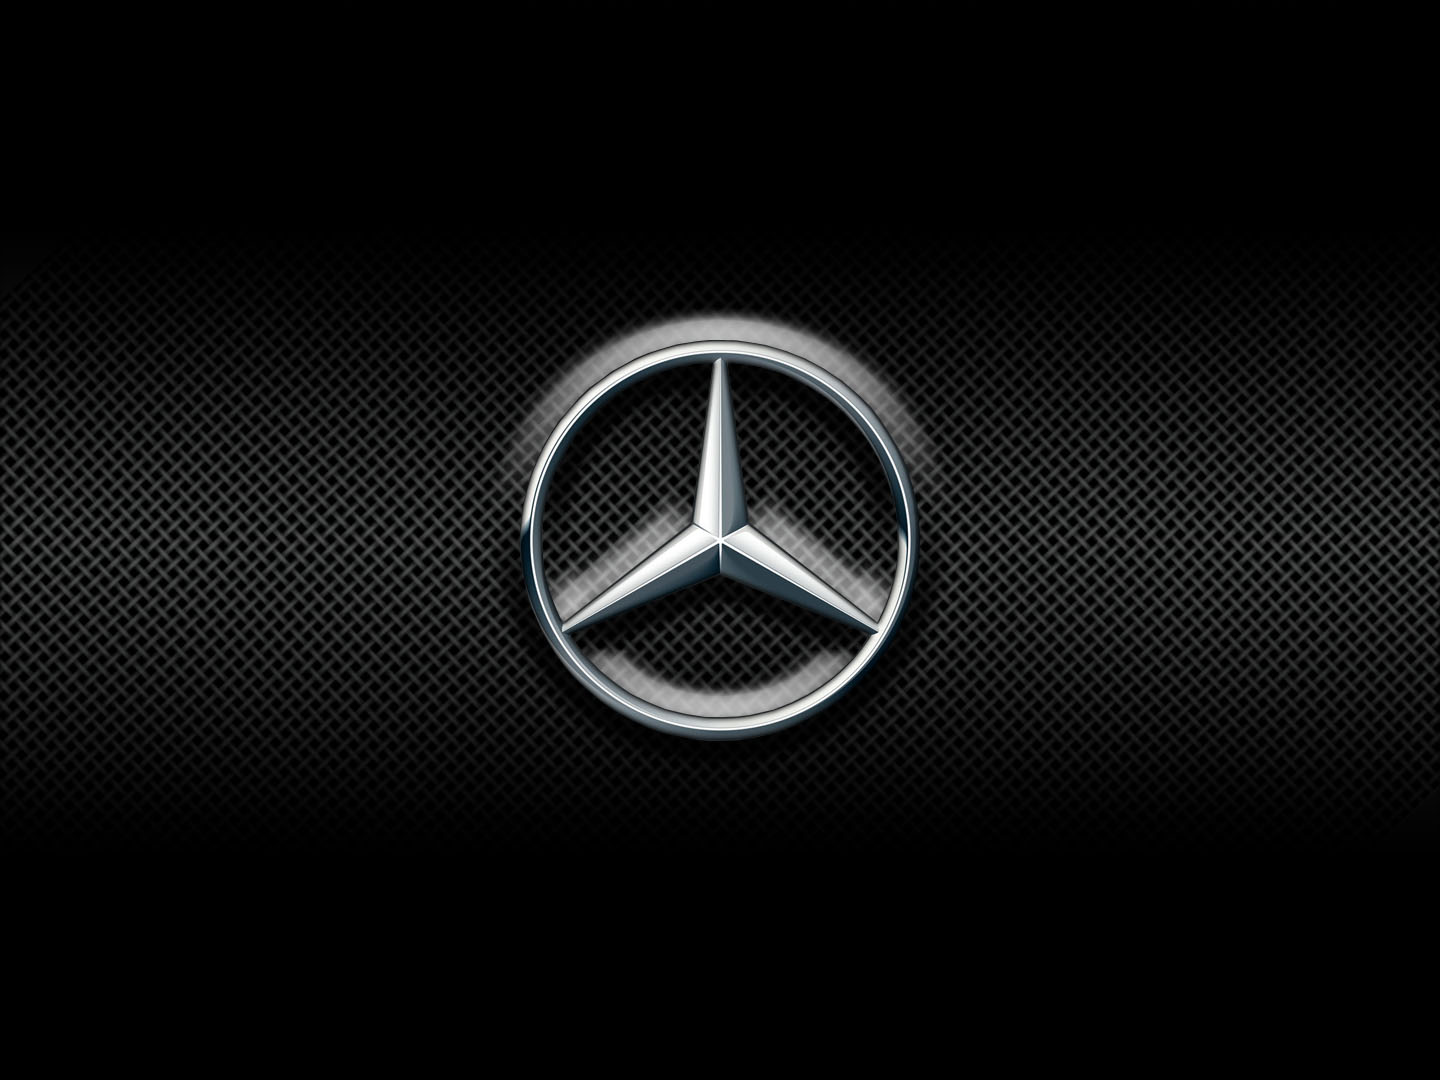 Mercedes Logo, Mercedes-Benz Car Symbol Meaning And History | Car ...